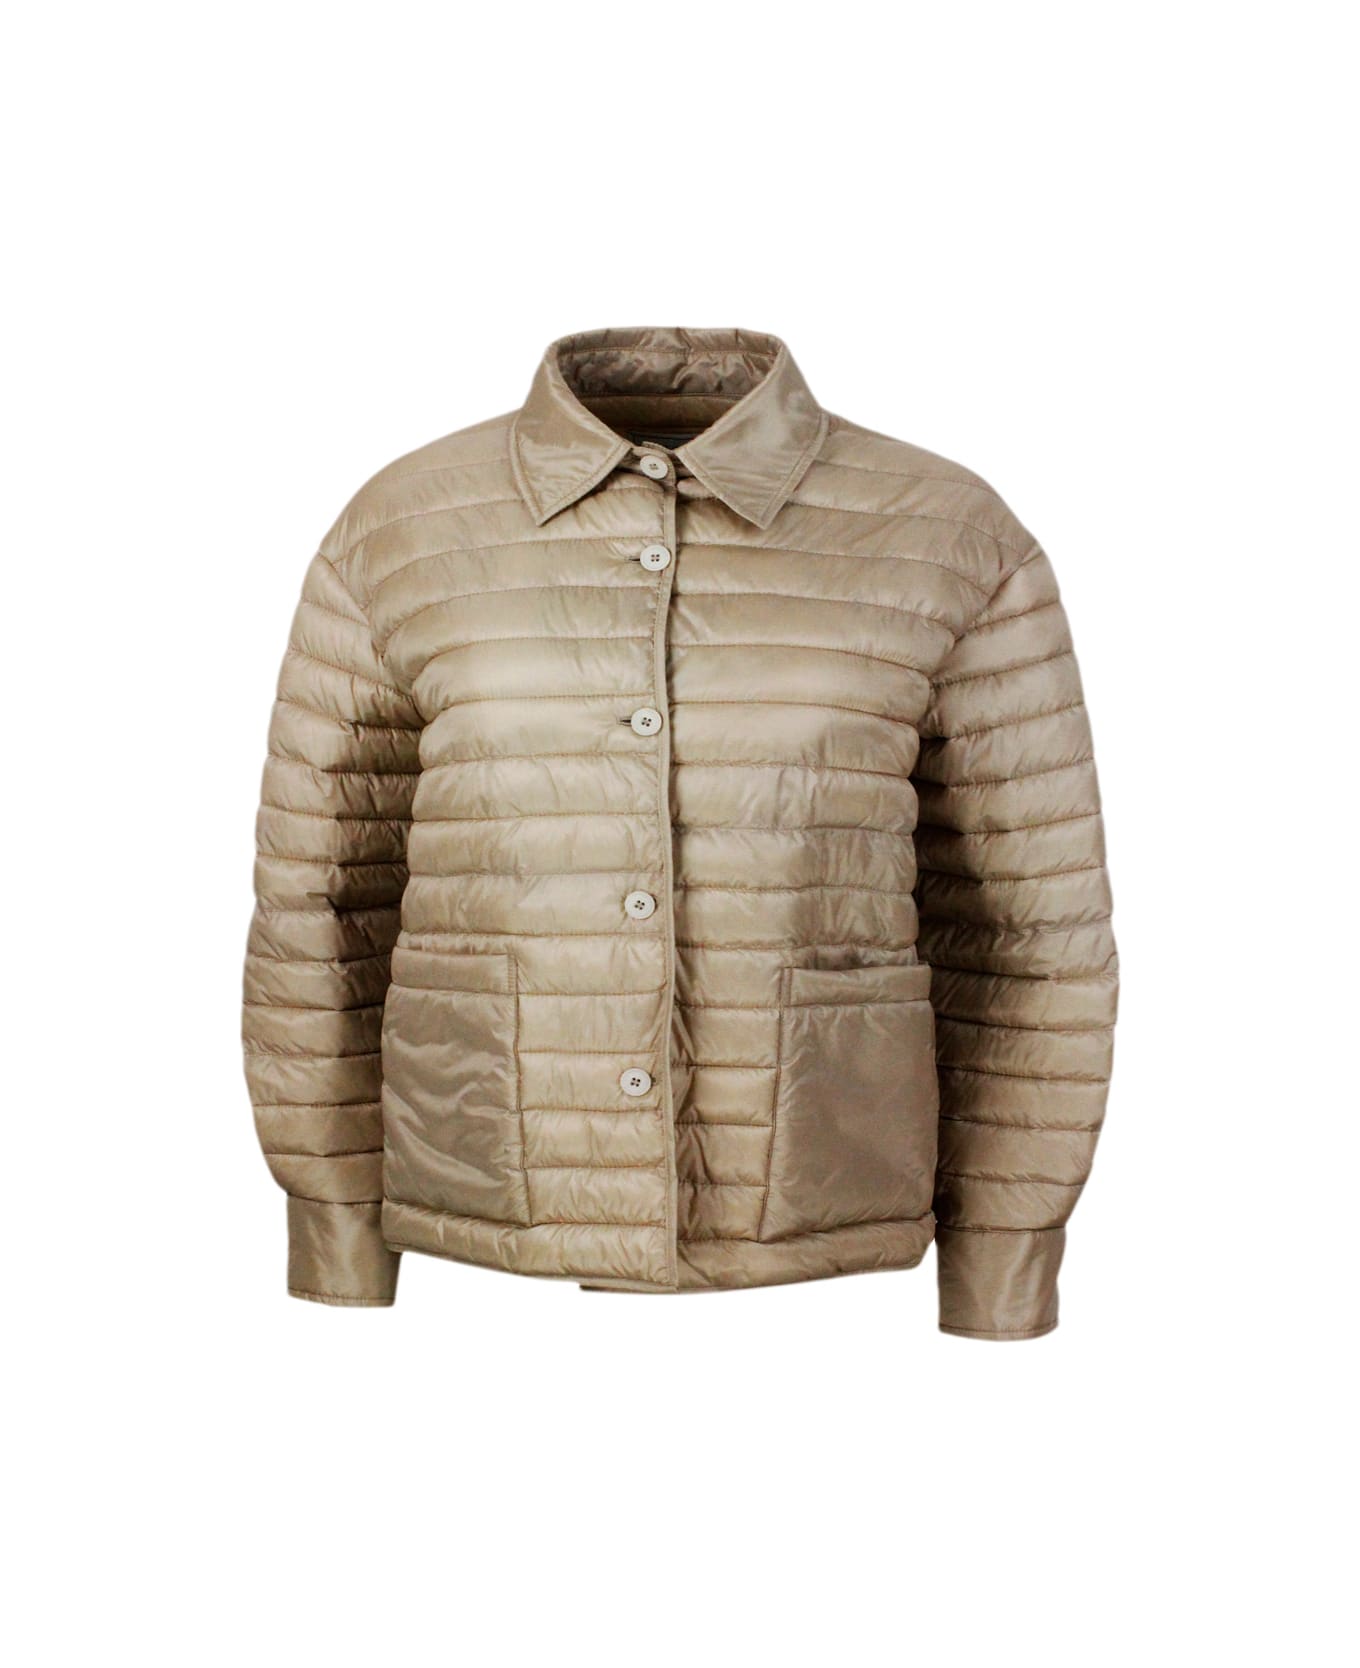 Antonelli Lightweight 100g Padded Jacket With Shirt Collar, Button Closure And Patch Pockets - Beige